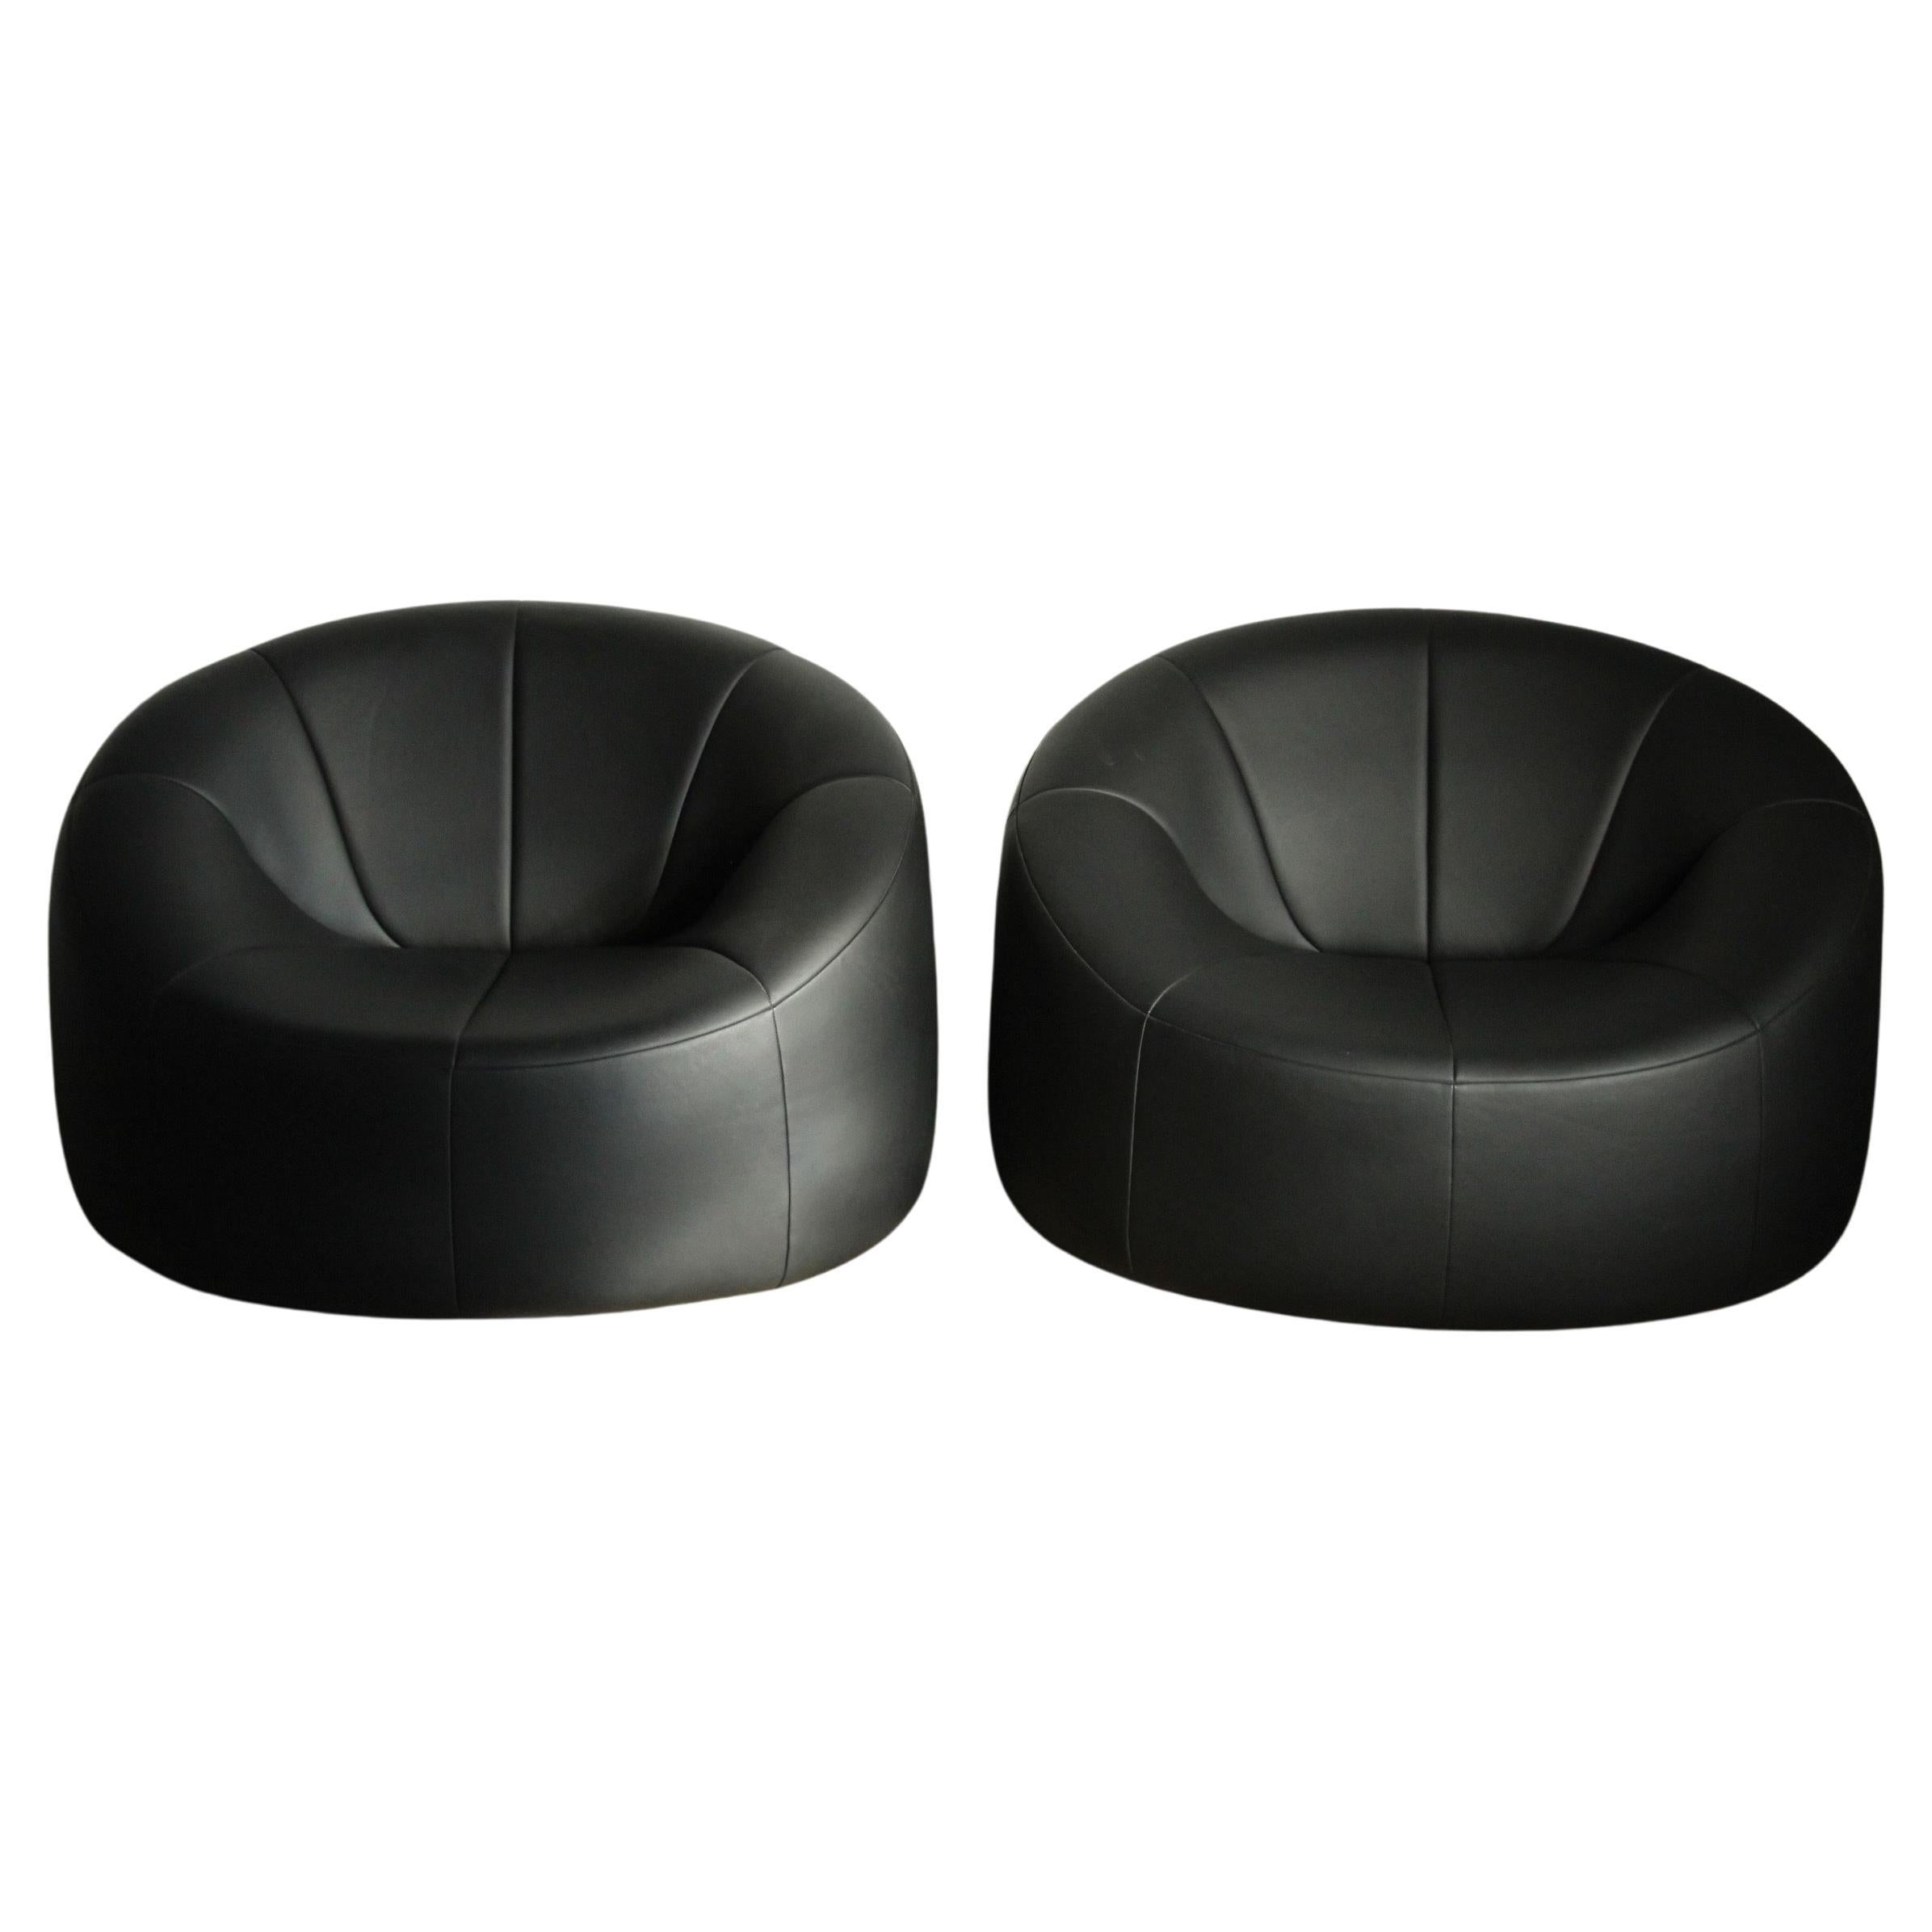 Pierre Paulin Black Leather Pumpkin Lounge Chairs for Ligne Roset, 2000s For Sale